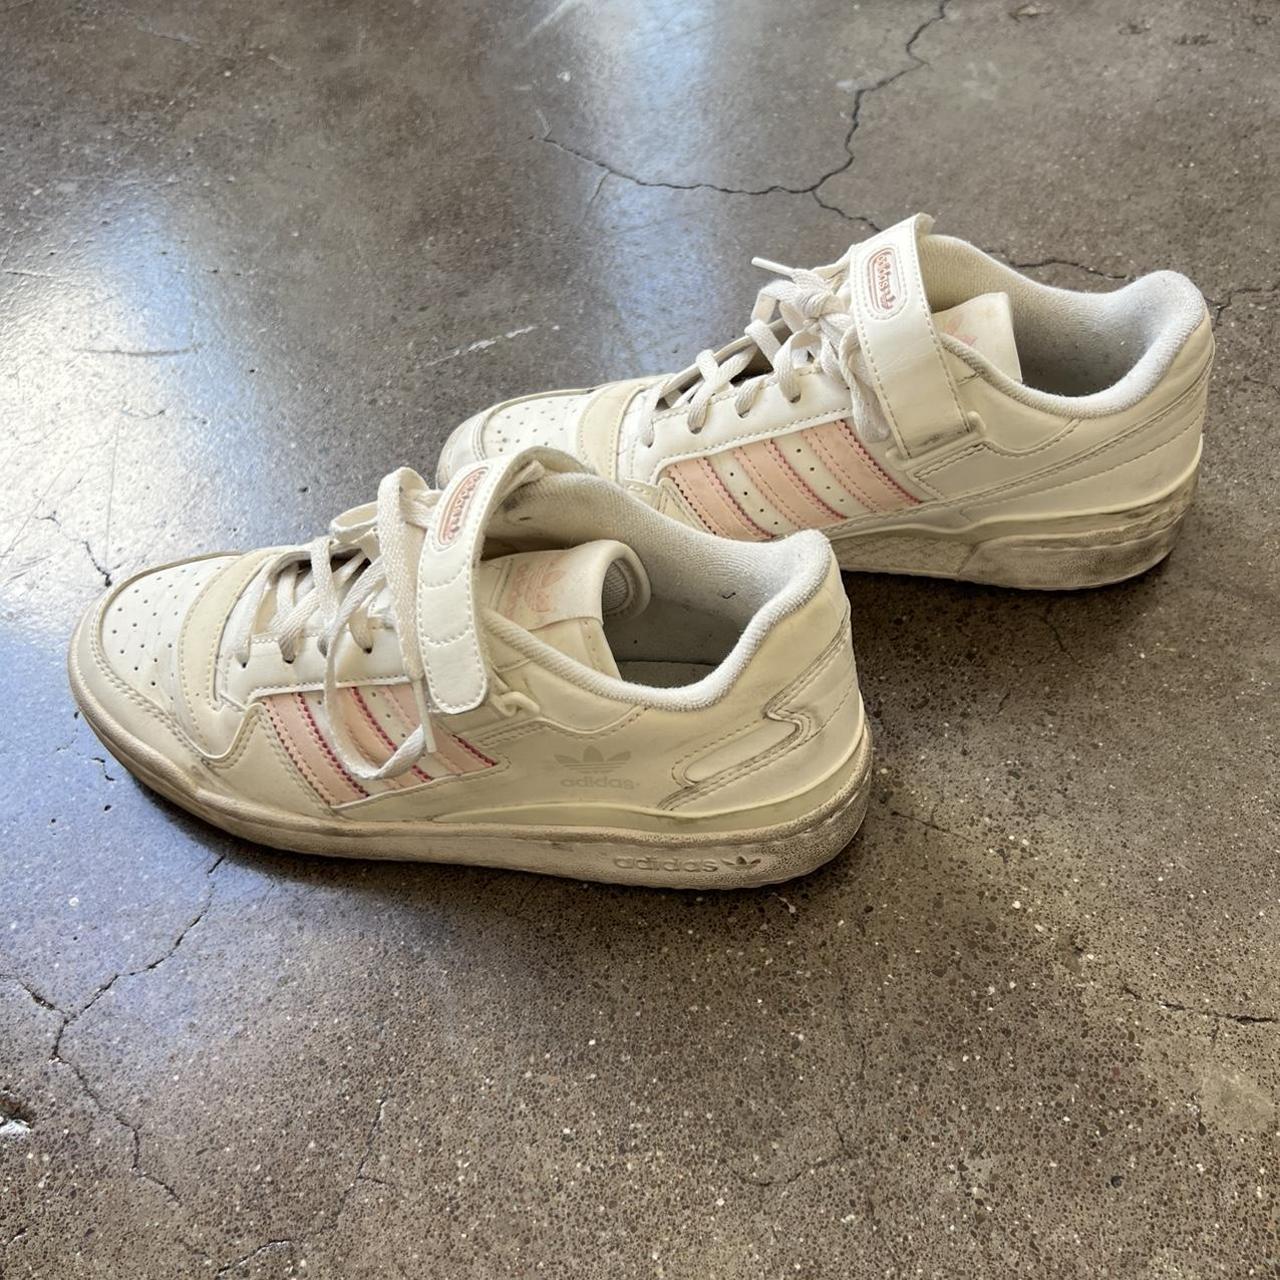 Product Image 2 - Pink Adidas forum low sneakers
Size